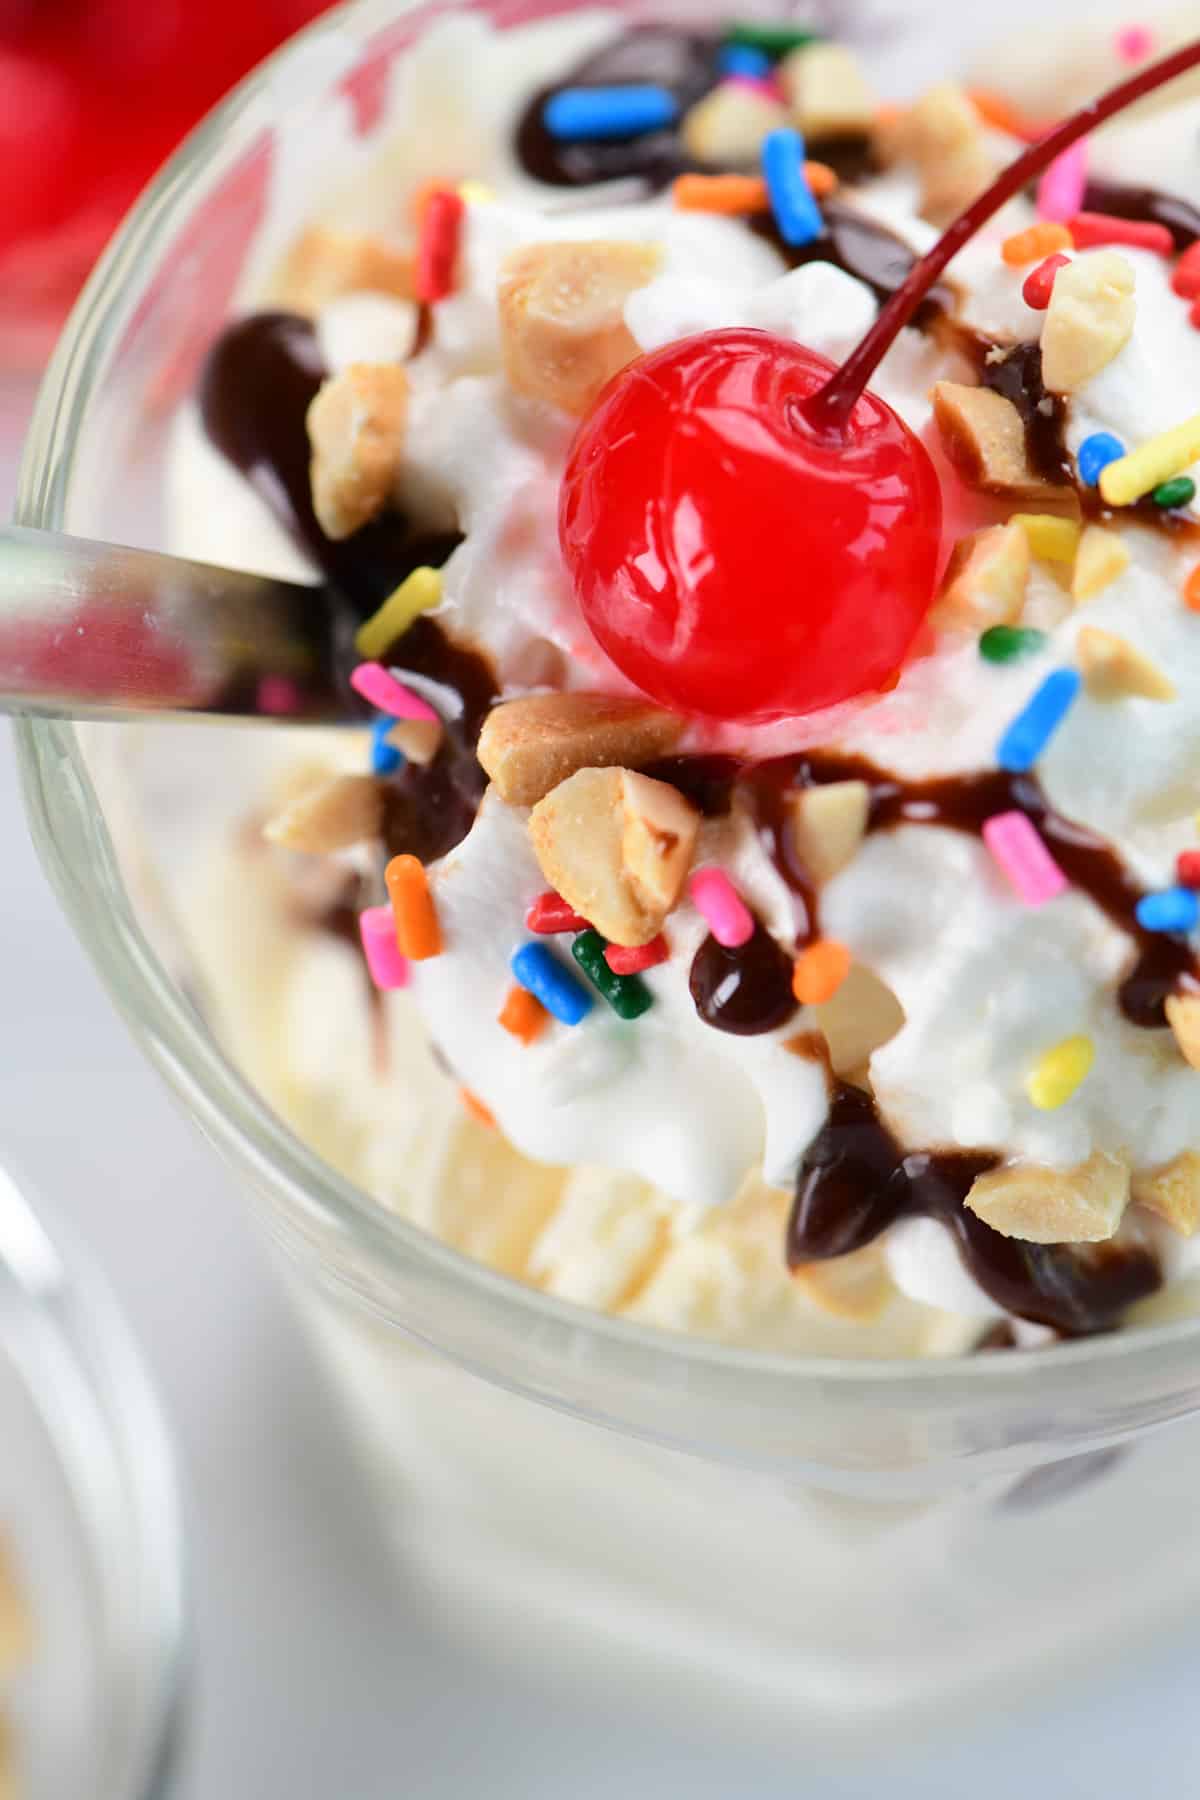 A sundae with toppings.